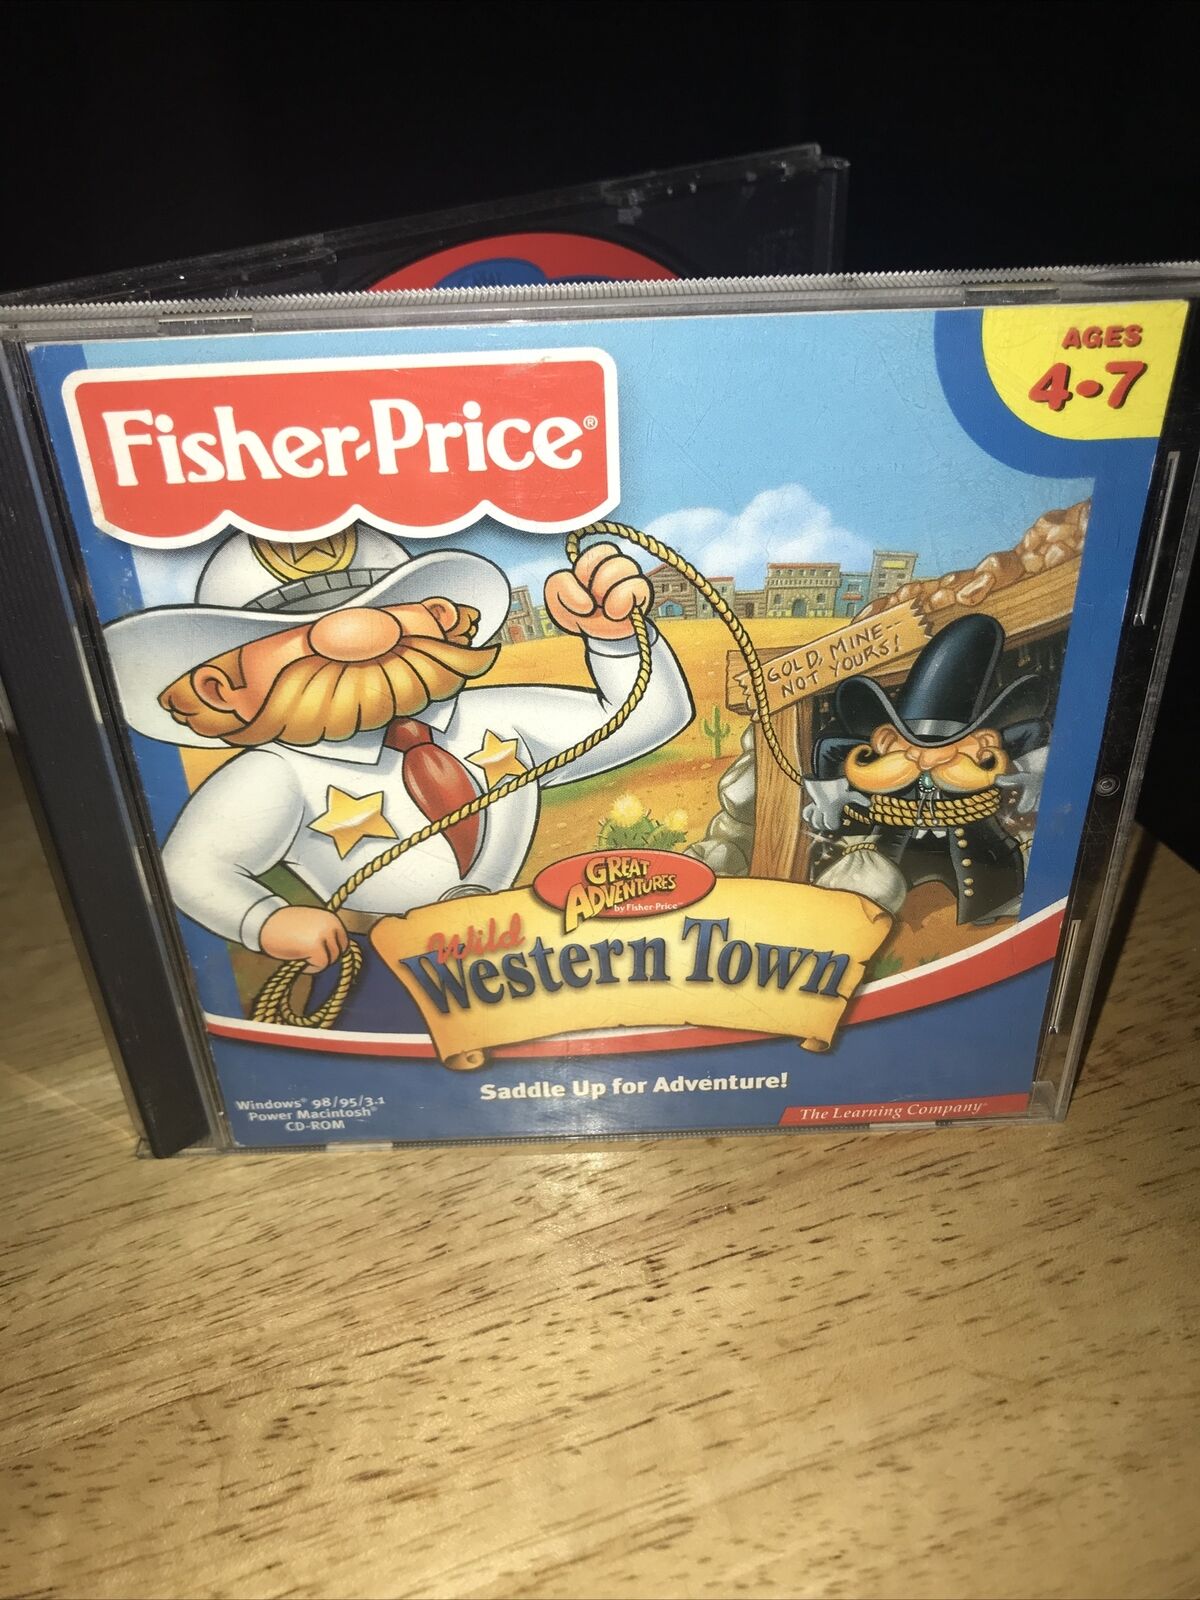 Fisher-Price Great Adventure Wild Western Town CD-ROM windows 95 and 3.1 and Mac